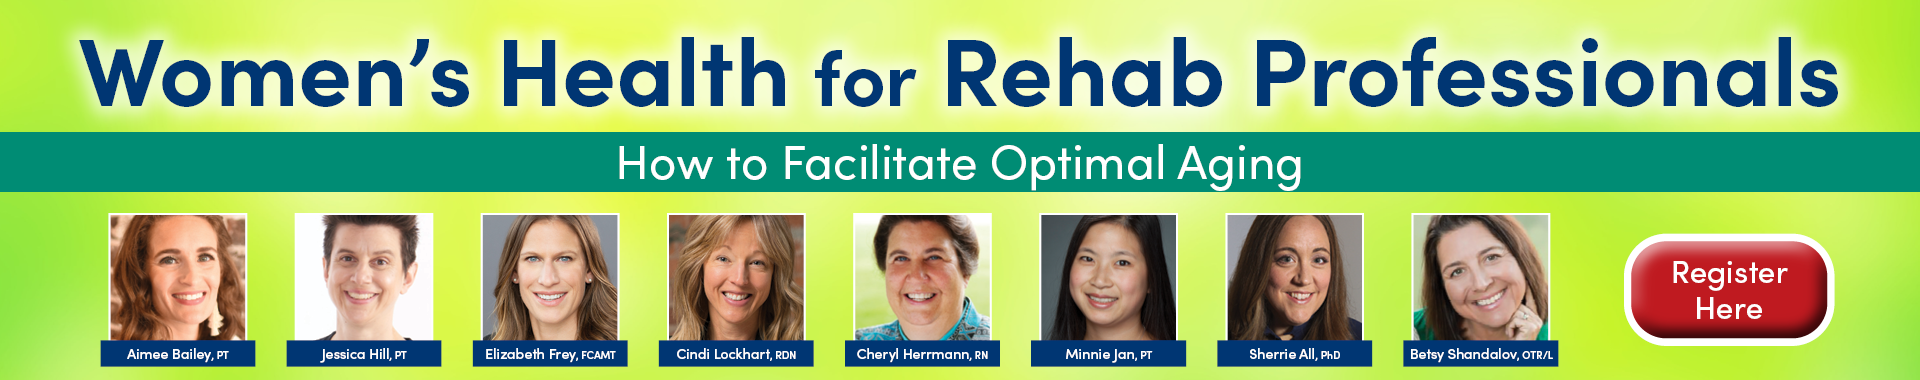 Women’s Health for Rehab Professionals: How to Facilitate Optimal Aging